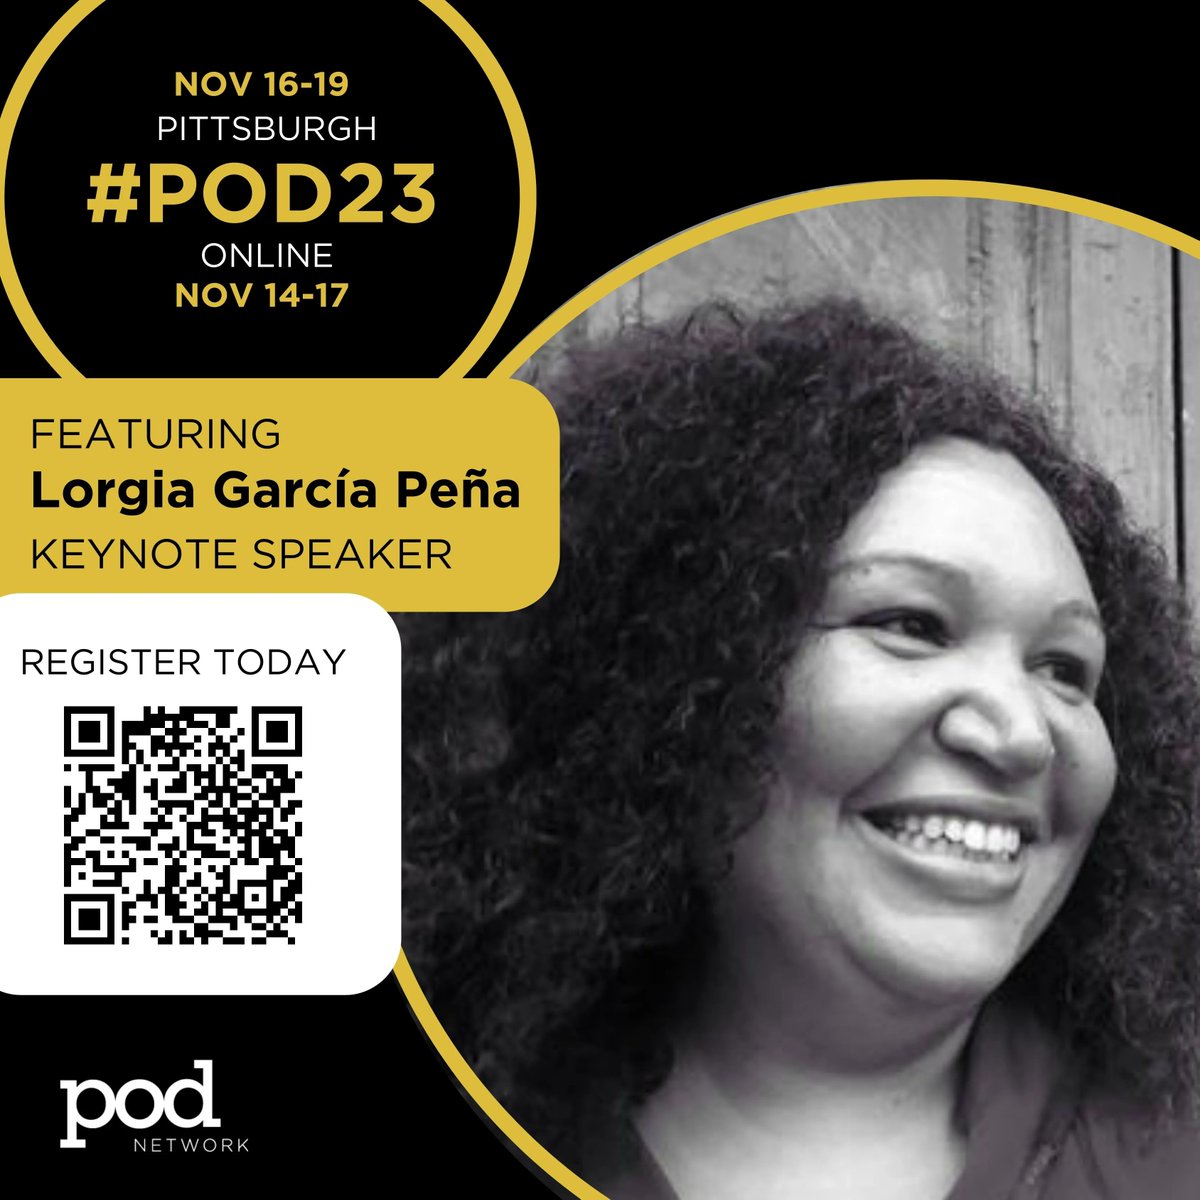 Exciting news! Dr. Lorgia García Peña, a renowned Latinx Studies scholar, activist, and writer, will be the keynote speaker at the 48th Annual POD Network Conference. Get ready for an inspiring talk! Register today: buff.ly/3TSNTpd #POD23